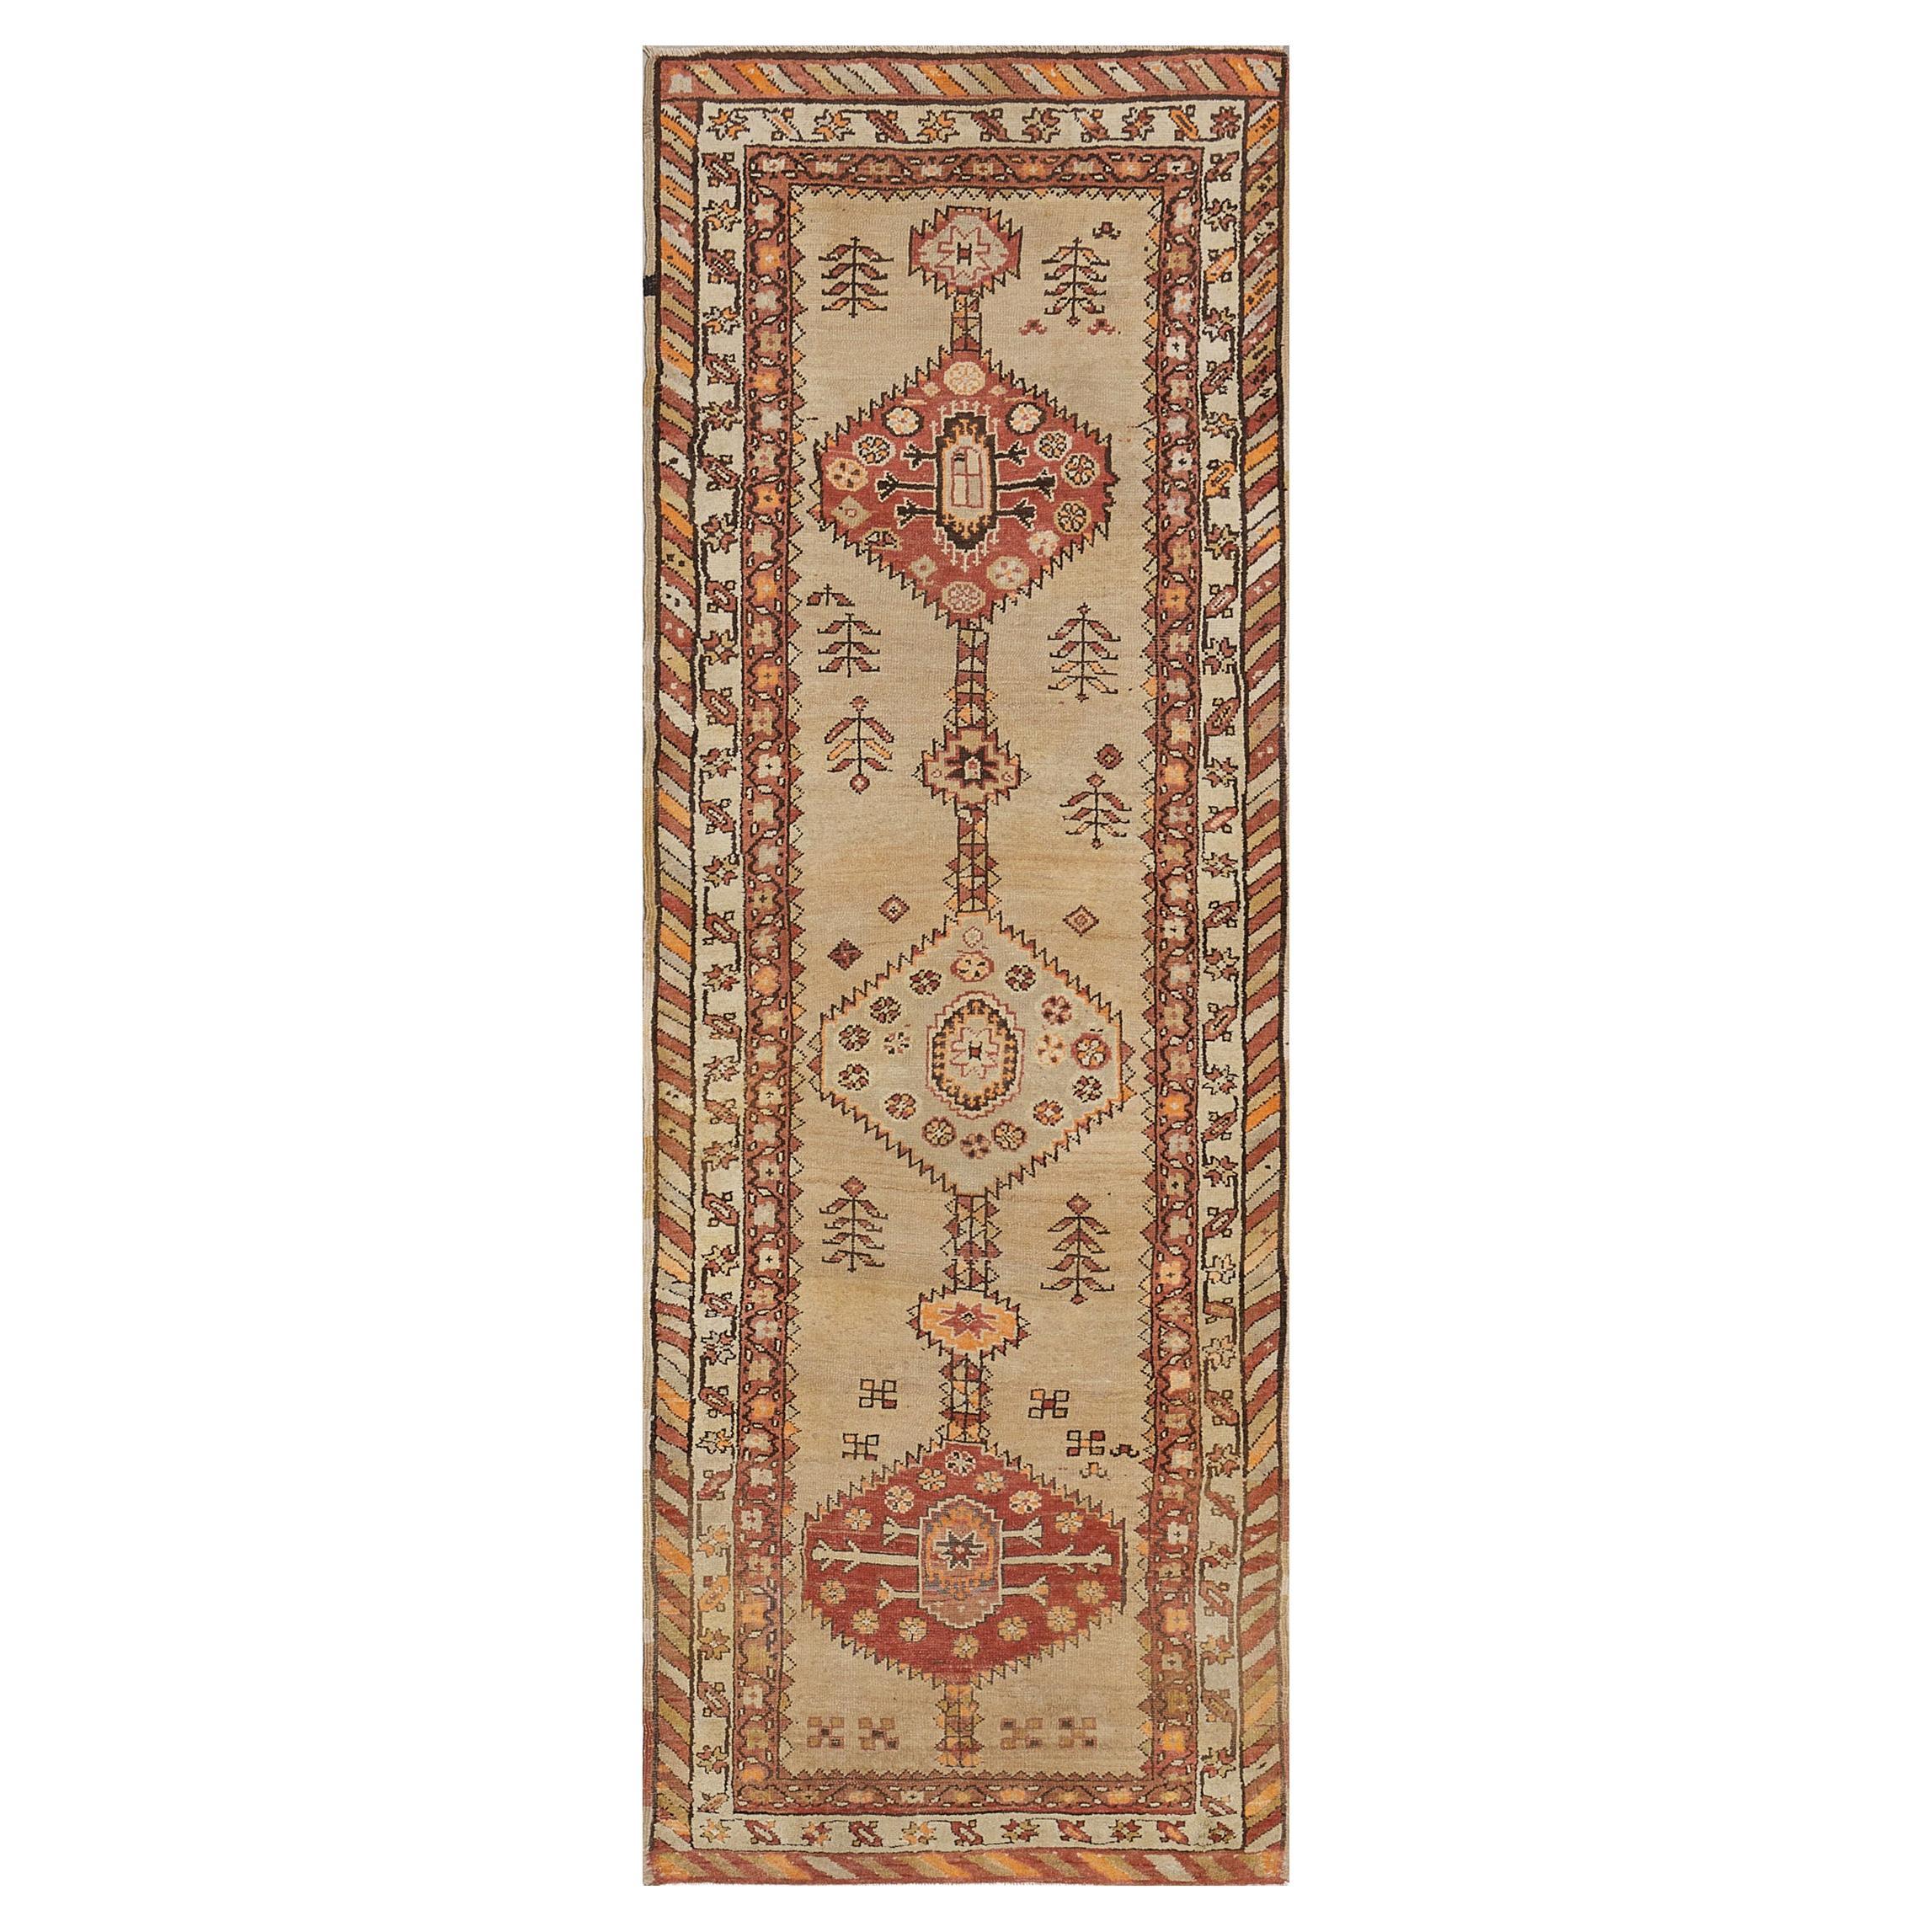 Antique Hand-Knotted Floral Wool Persian Serab Runner